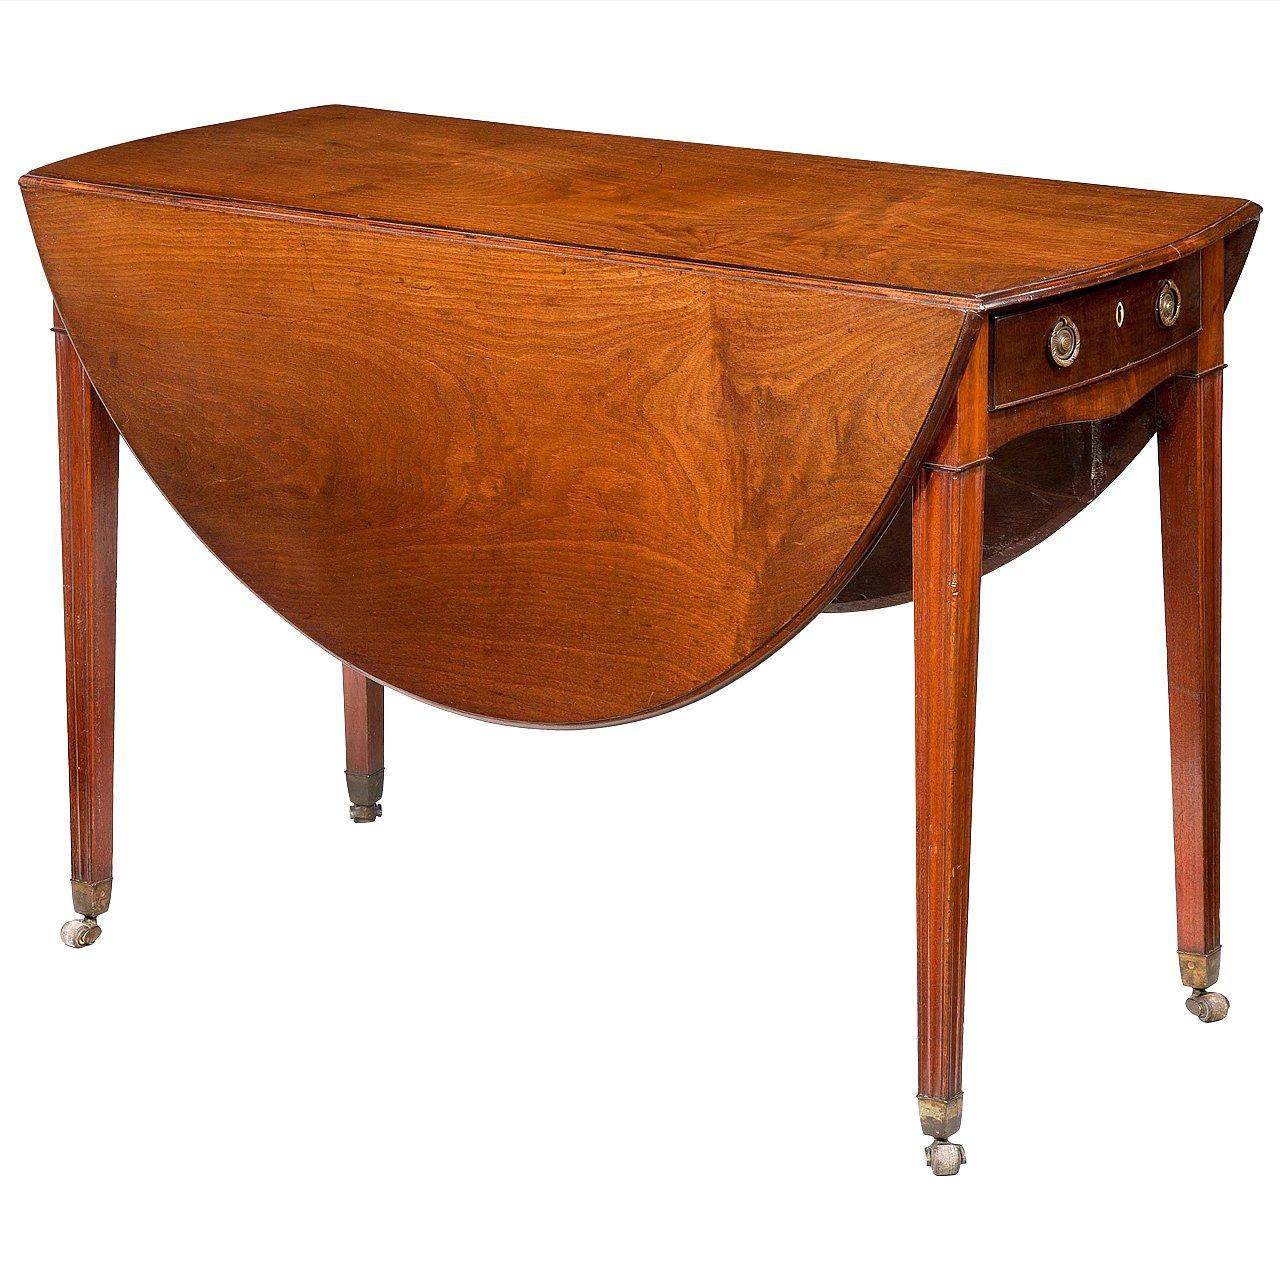 Late 18th Century Drop-Leaf Table